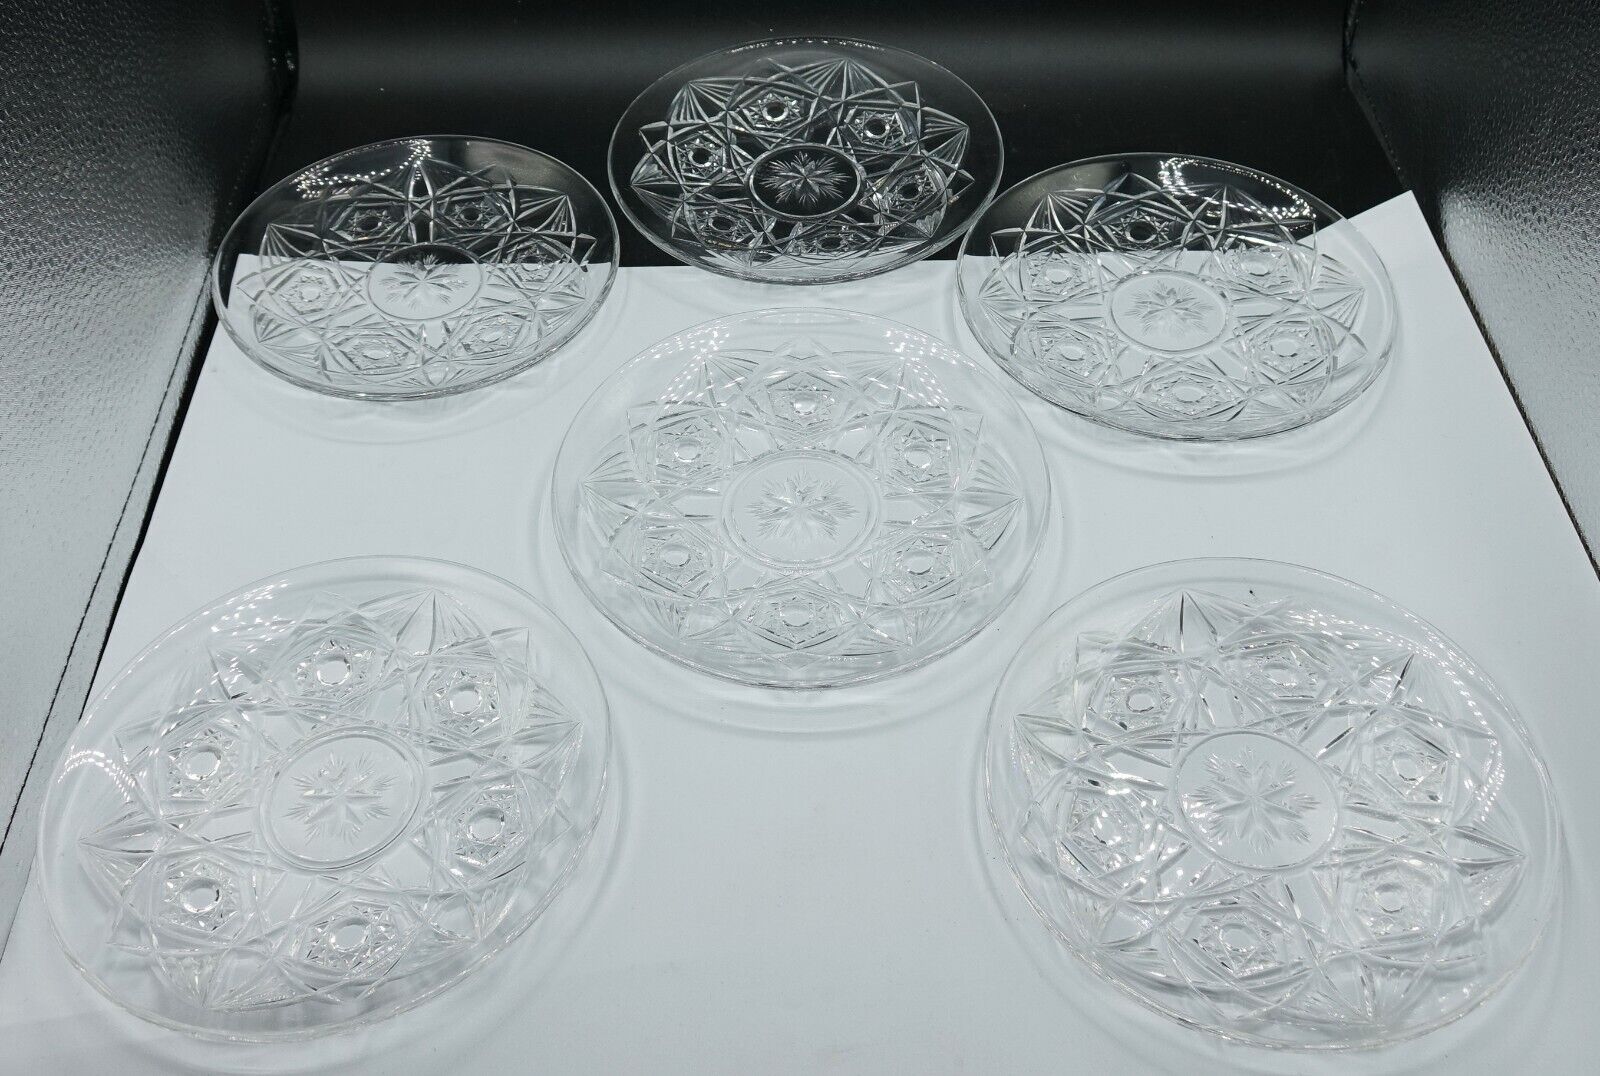 SIGNED French Baccarat Lagny Cut Crystal Underplates or Dishes Set of 6, ca 1935